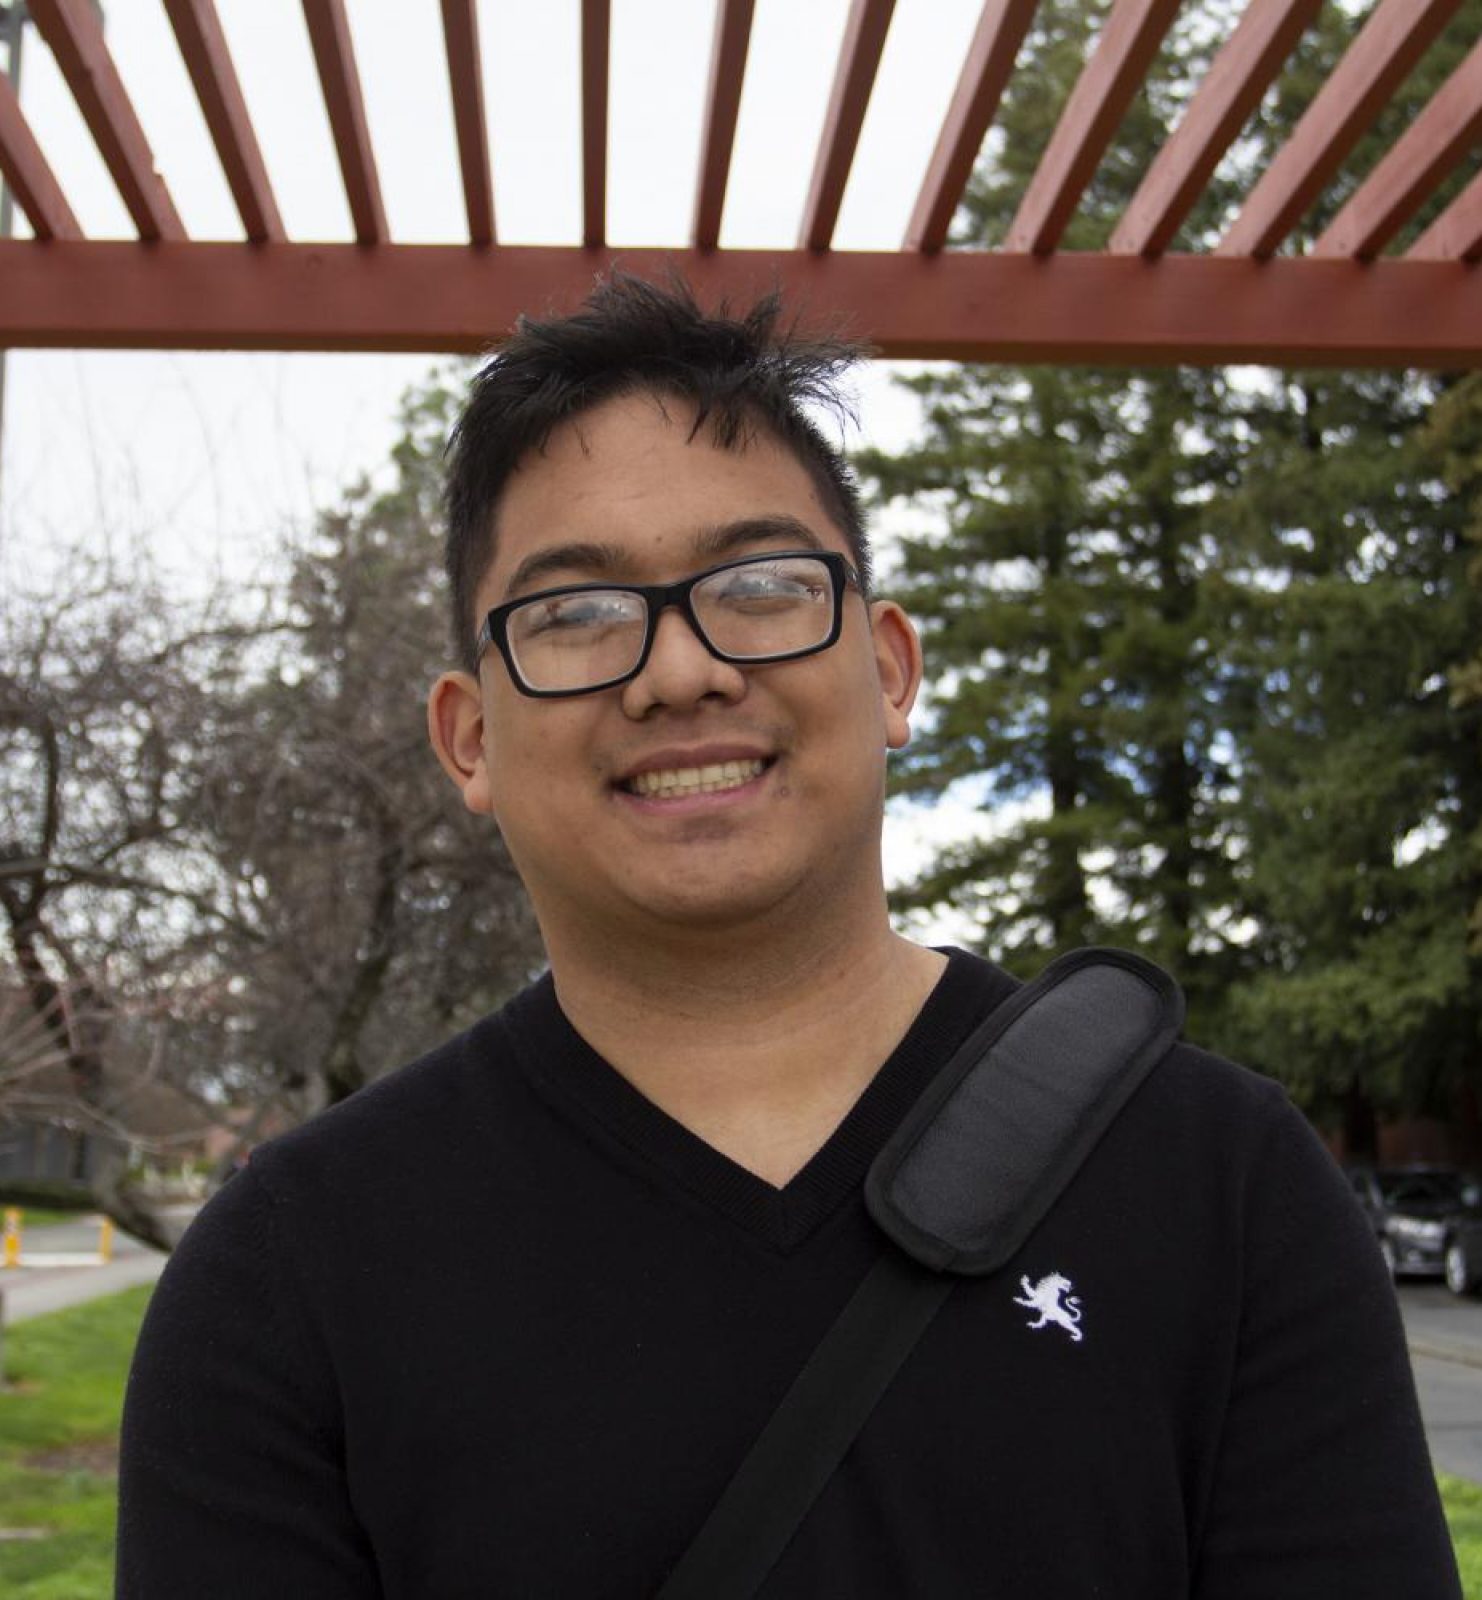 “The drive to learn new things in my classes because the new classes I’m taking are pretty interesting and I actually enjoy it. My morning routine usually consists of getting up, making coffee, trying to make breakfast and getting here right away to beat parking.” – Austin Aninzo | Economics Major